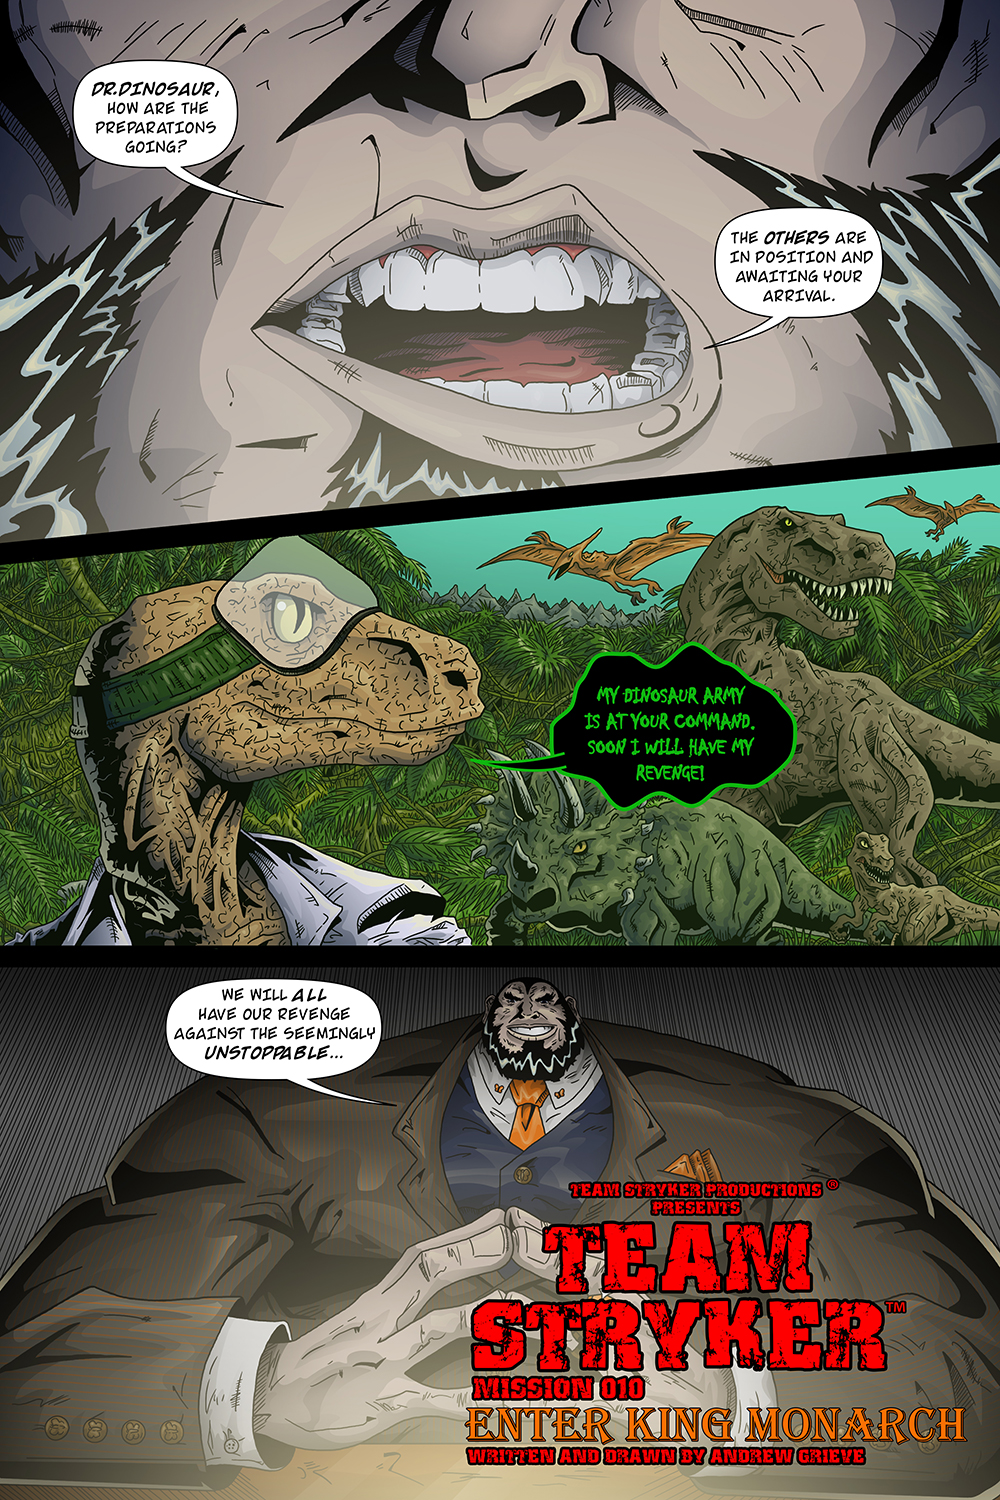 MISSION 010: PAGE 01 “DINOSAUR ARMY”